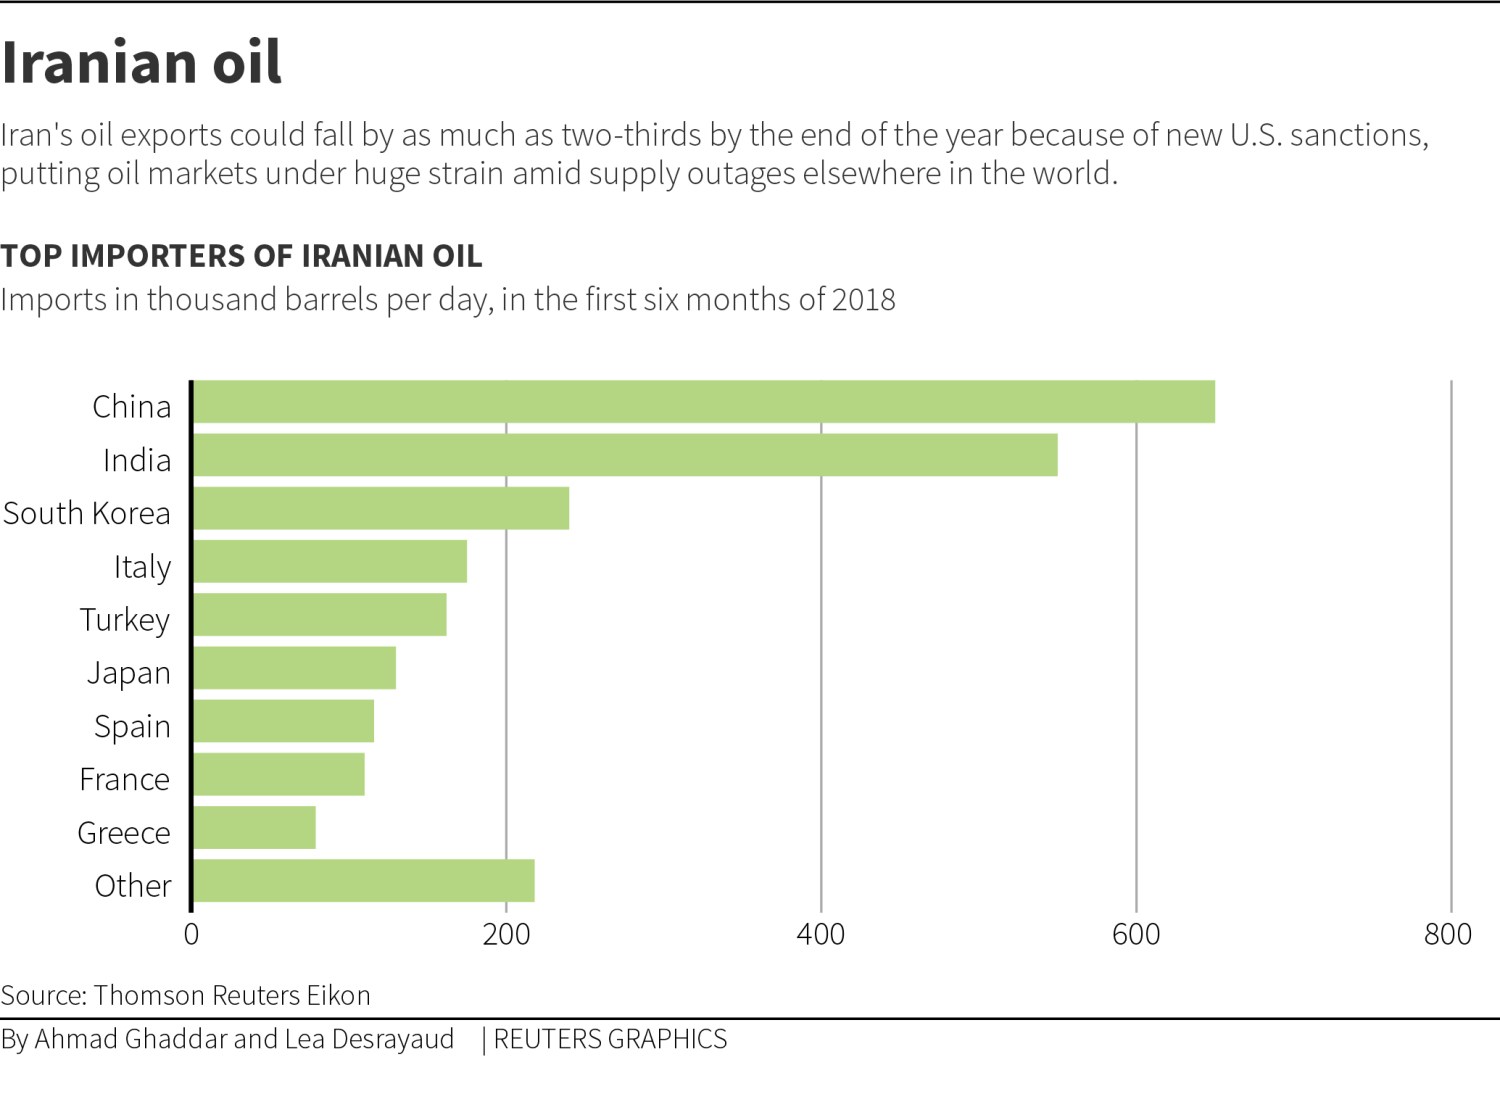 Iran's oil exports could fall by as much as two-thirds by the end of the year because of new U.S. sanctions, putting oil markets under huge strain amid supply outages elsewhere in the world, July 17, 2018.